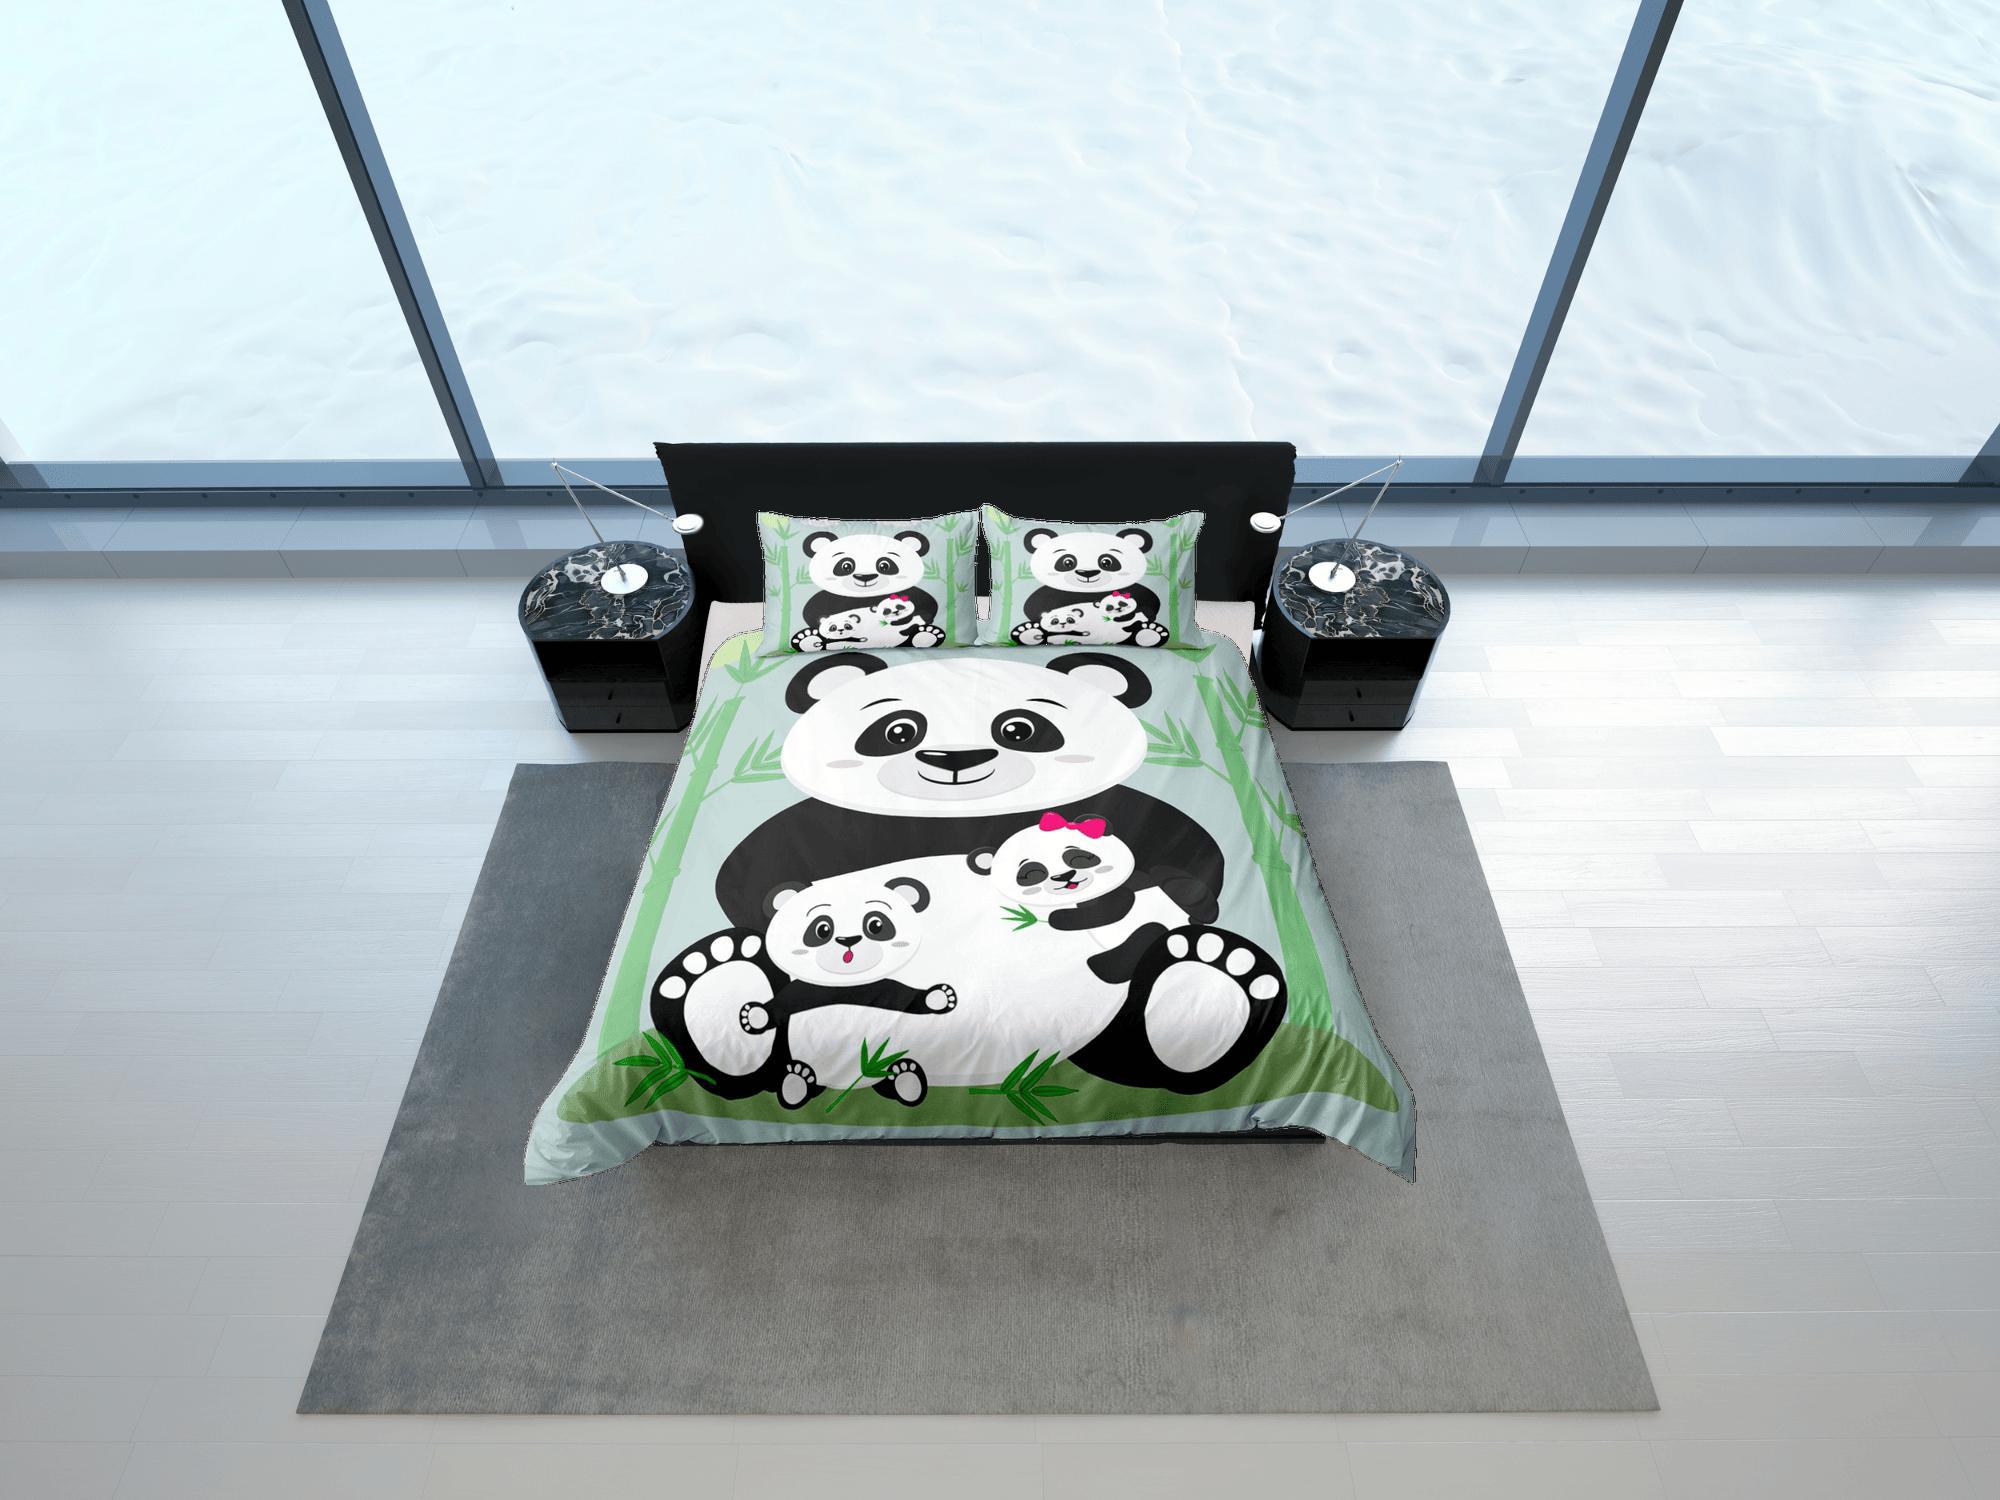 daintyduvet Cute Panda Family Duvet Cover Set Colorful Bedspread, Kids Bedding with Pillowcase